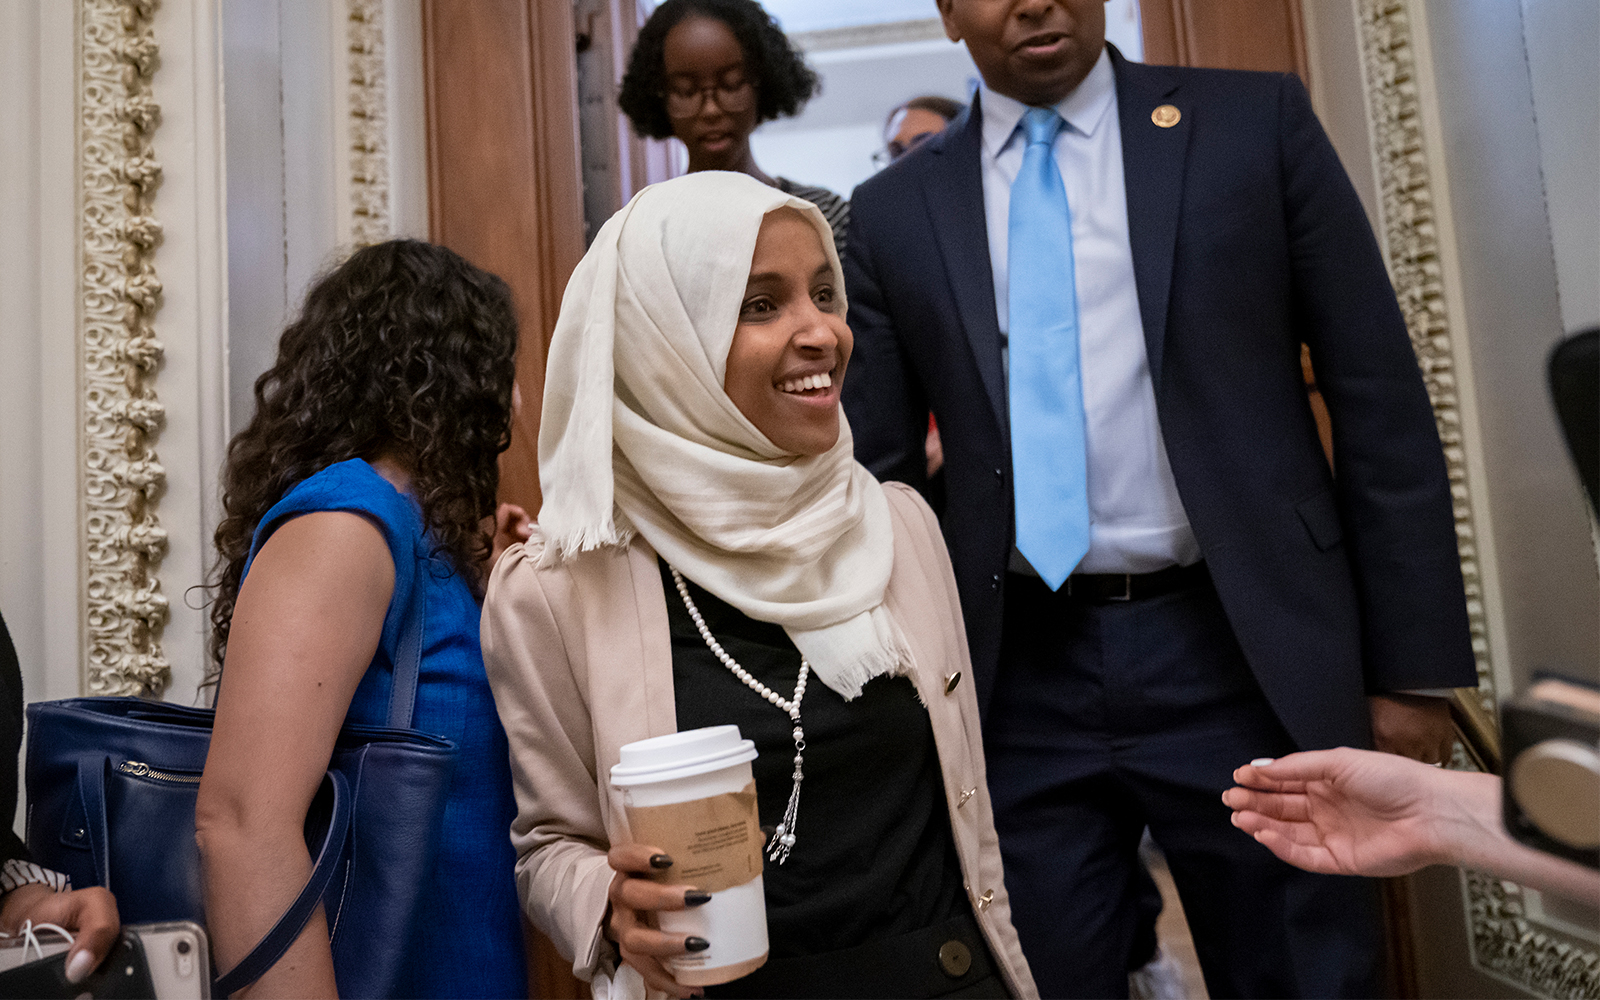 Ilhan Omar Us Congresswoman In Eye Of Political Storm The Times Of Israel 